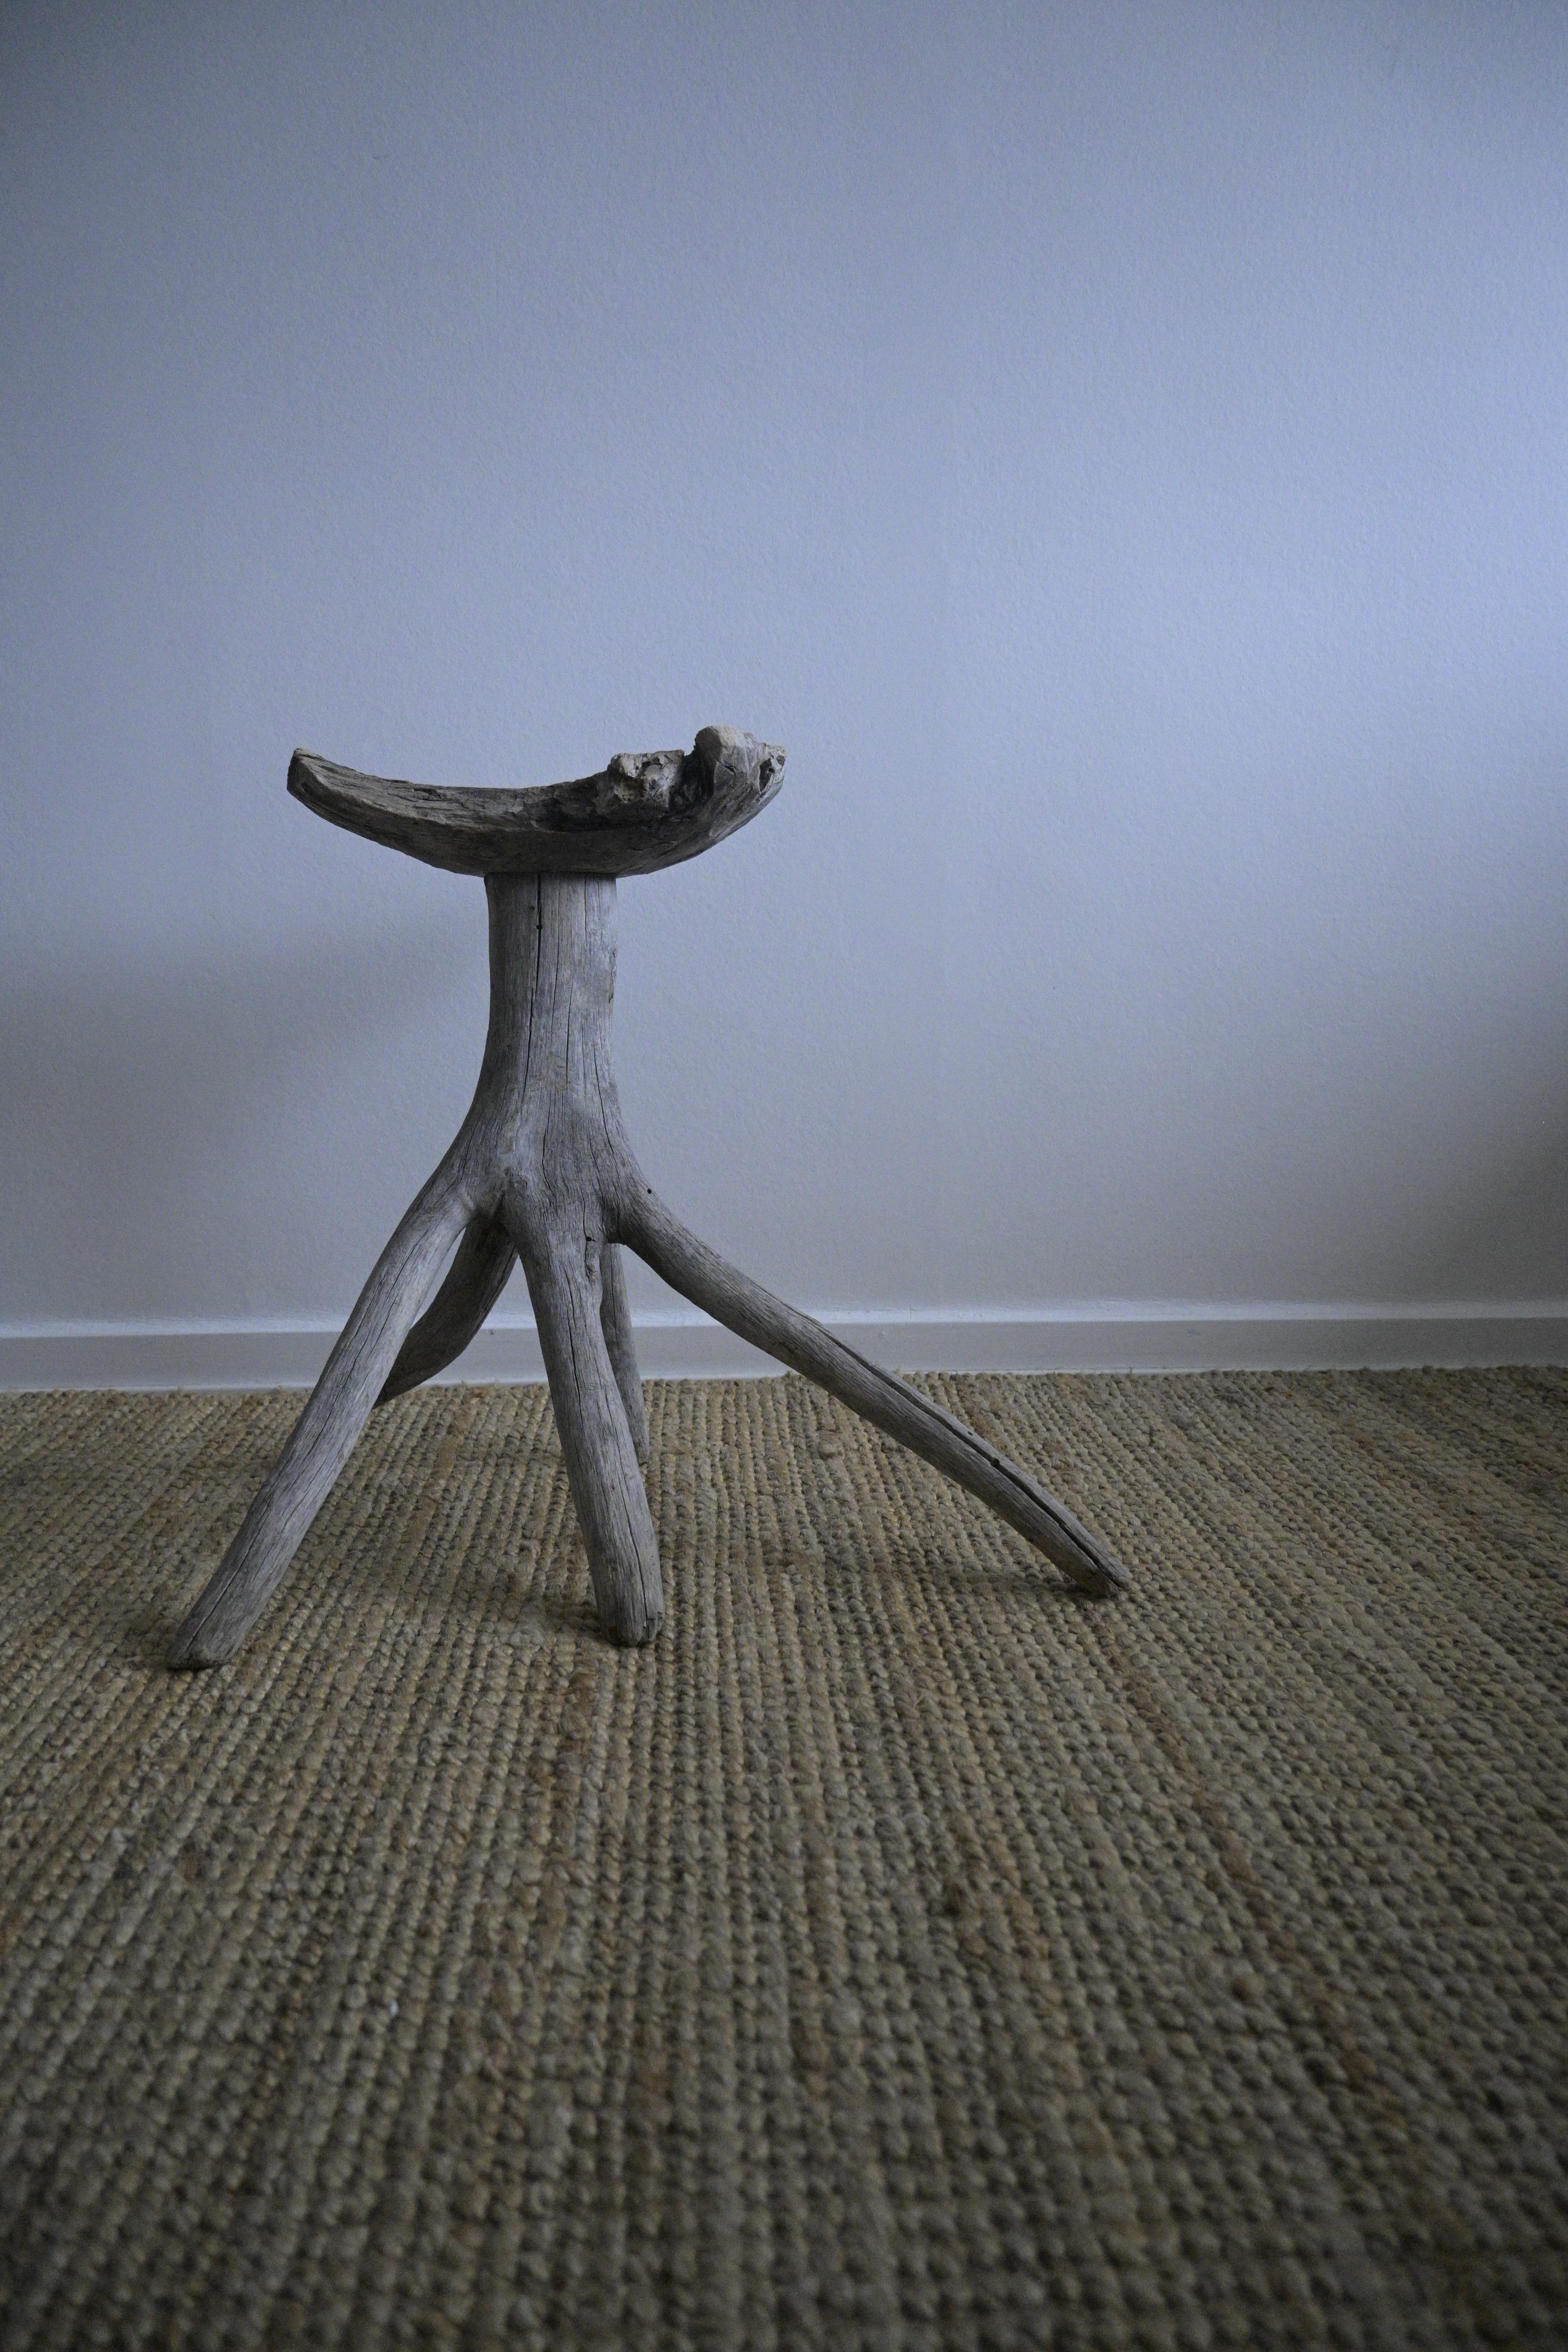 Primitive Swedish Stool 1880-1920c

Beautiful pearl grey patina.
Wear consistent with age and use.

Made out of pine and birch wood.

Height: 46 cm/18.1 inch
Depth: 30 cm cirka/11.8 inch
Widht: 53 cm cirka/20.8 inch